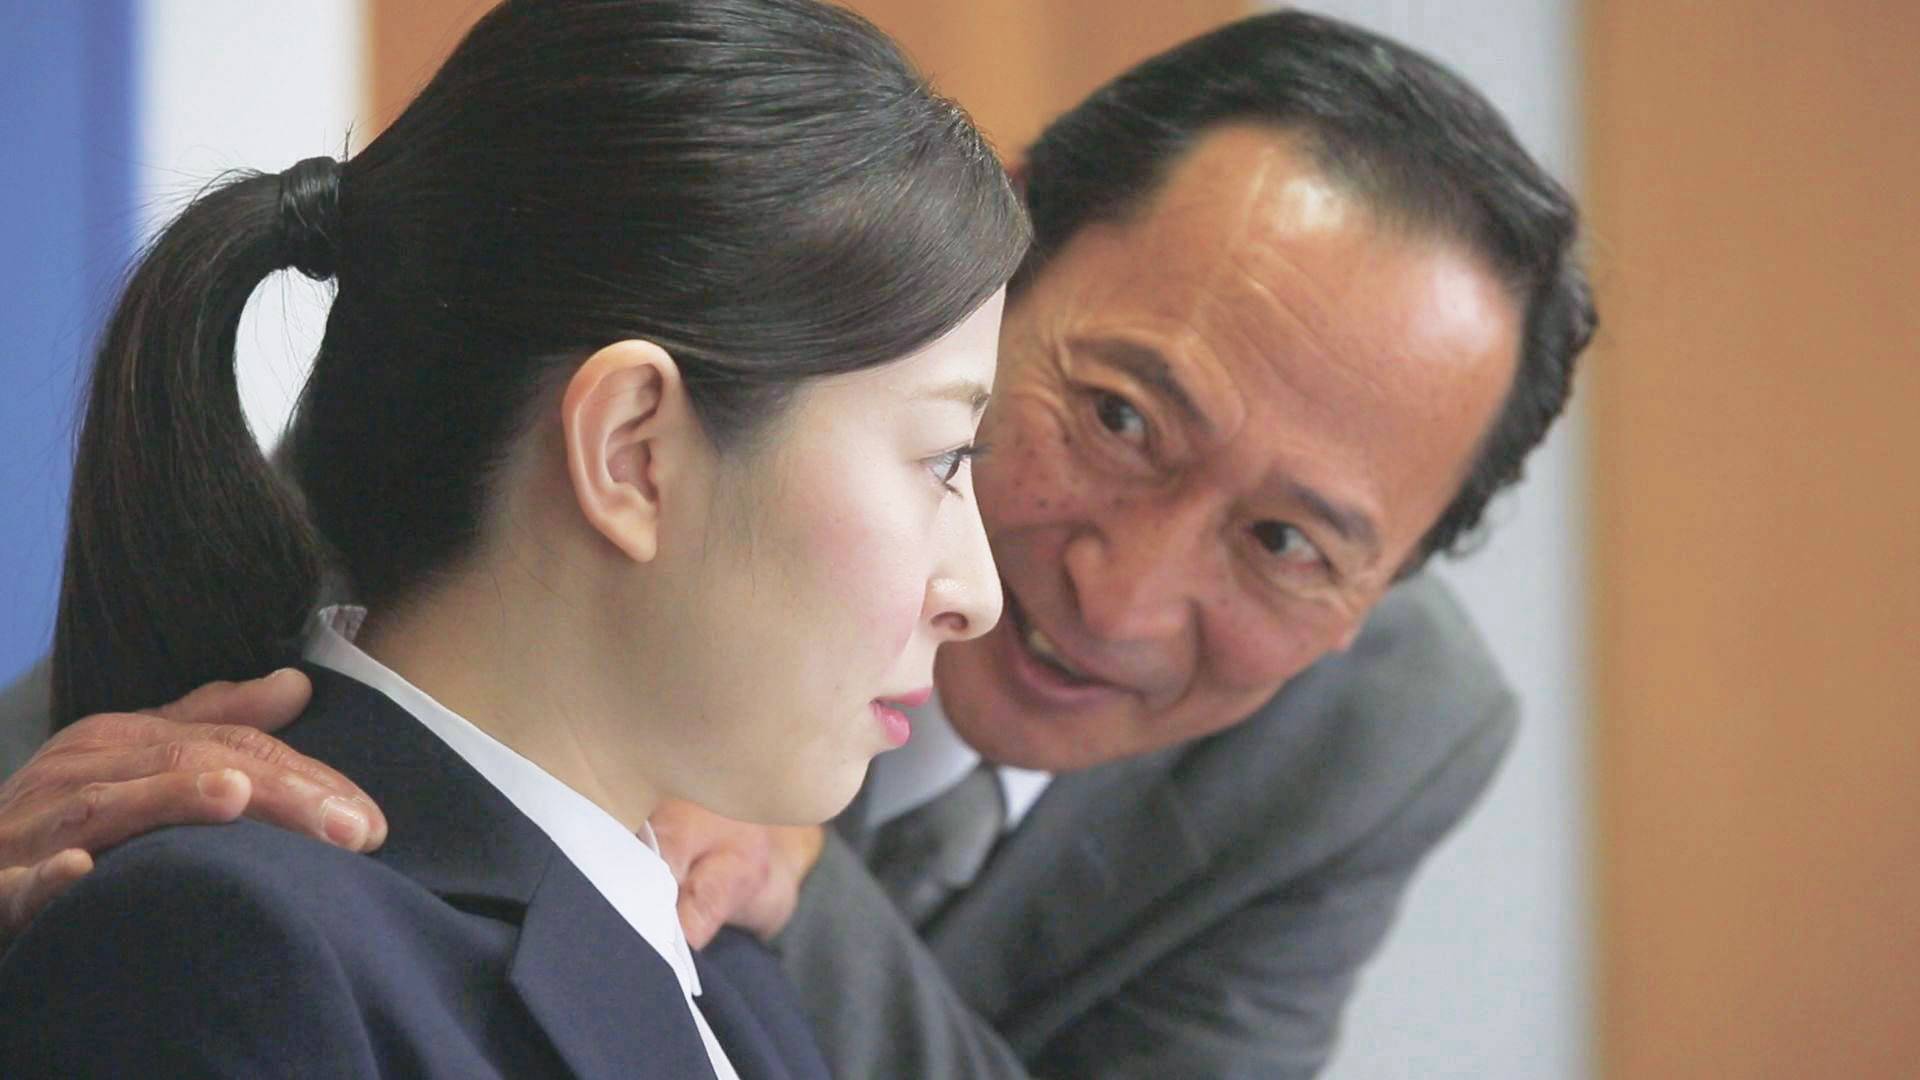 Japans government releases video to help eradicate harassment from politics picture